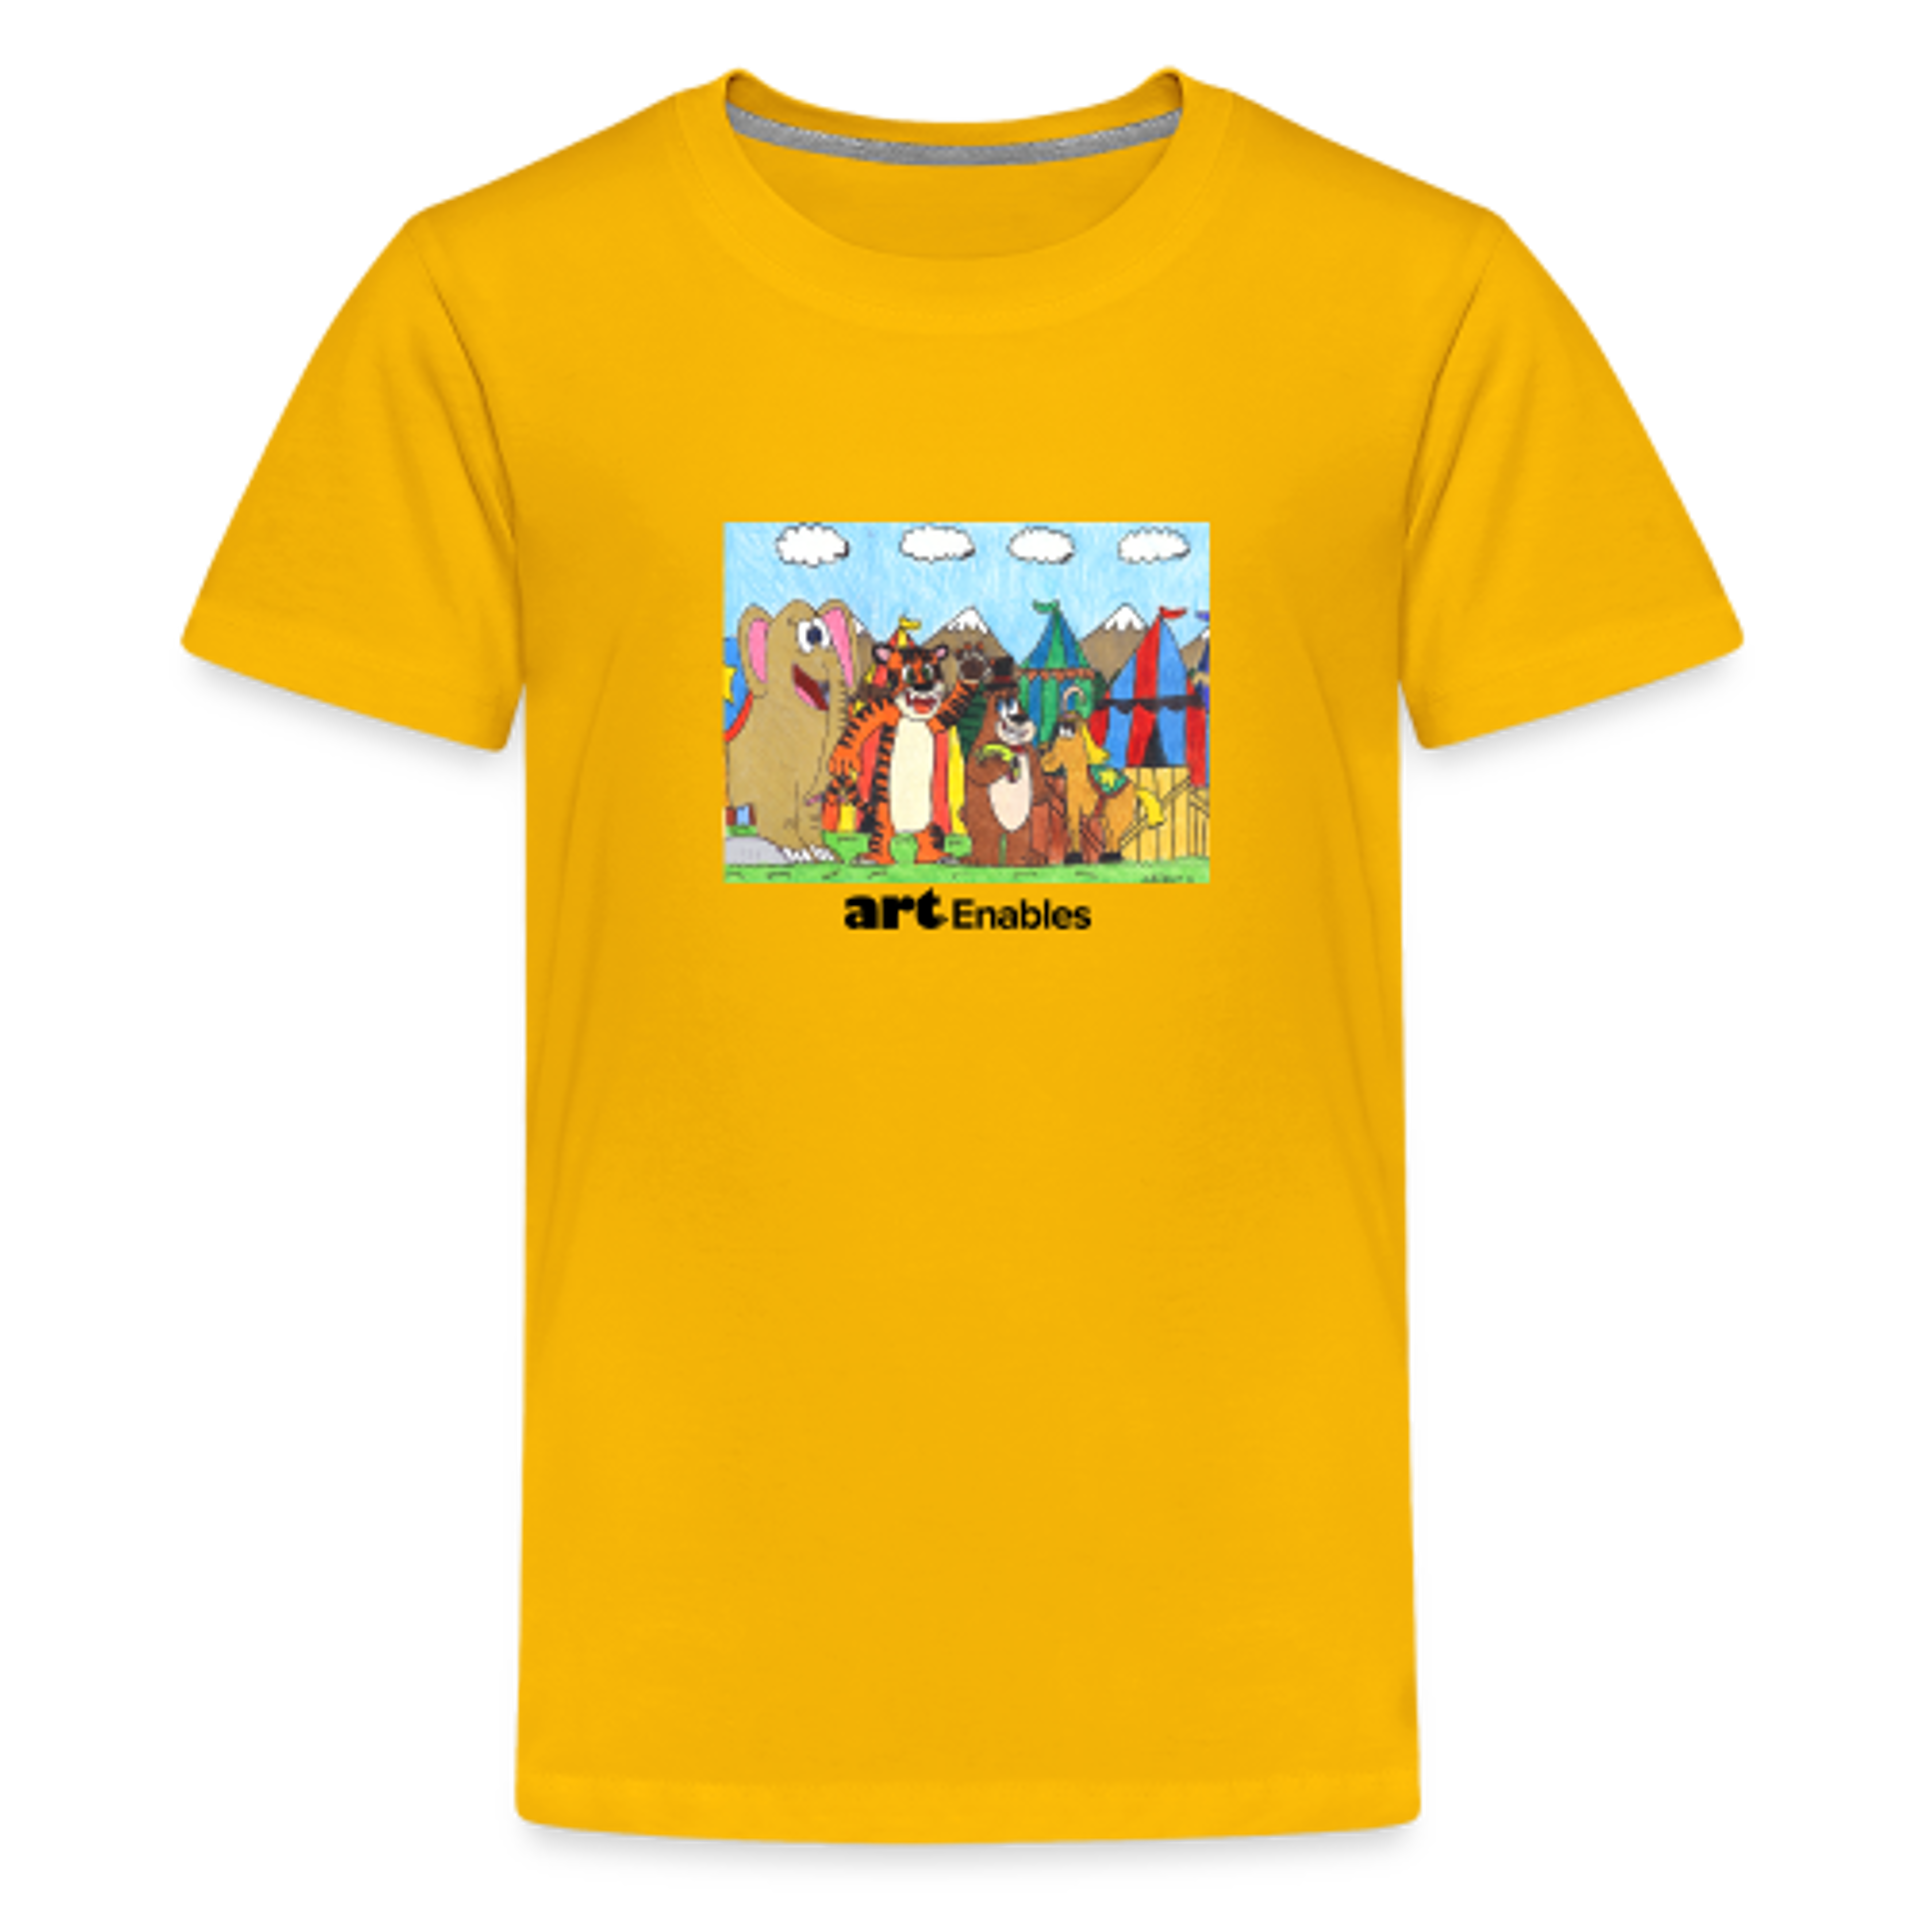 Youth T-shirt (artwork by Maurice Barnes) Large by Art Enables Merchandise